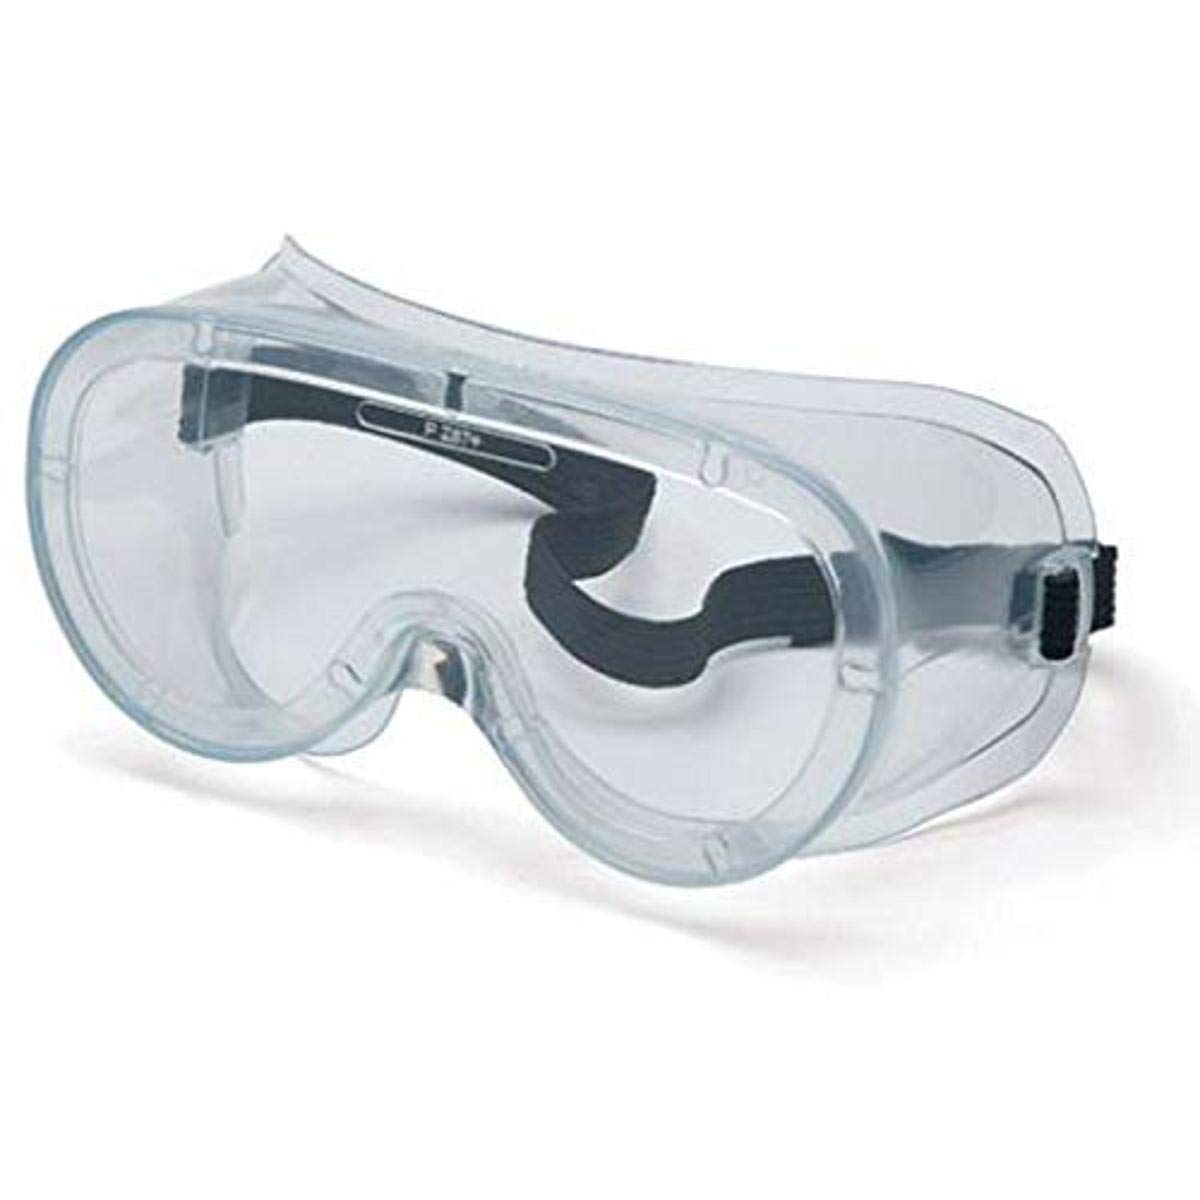 Safety goggles are on display